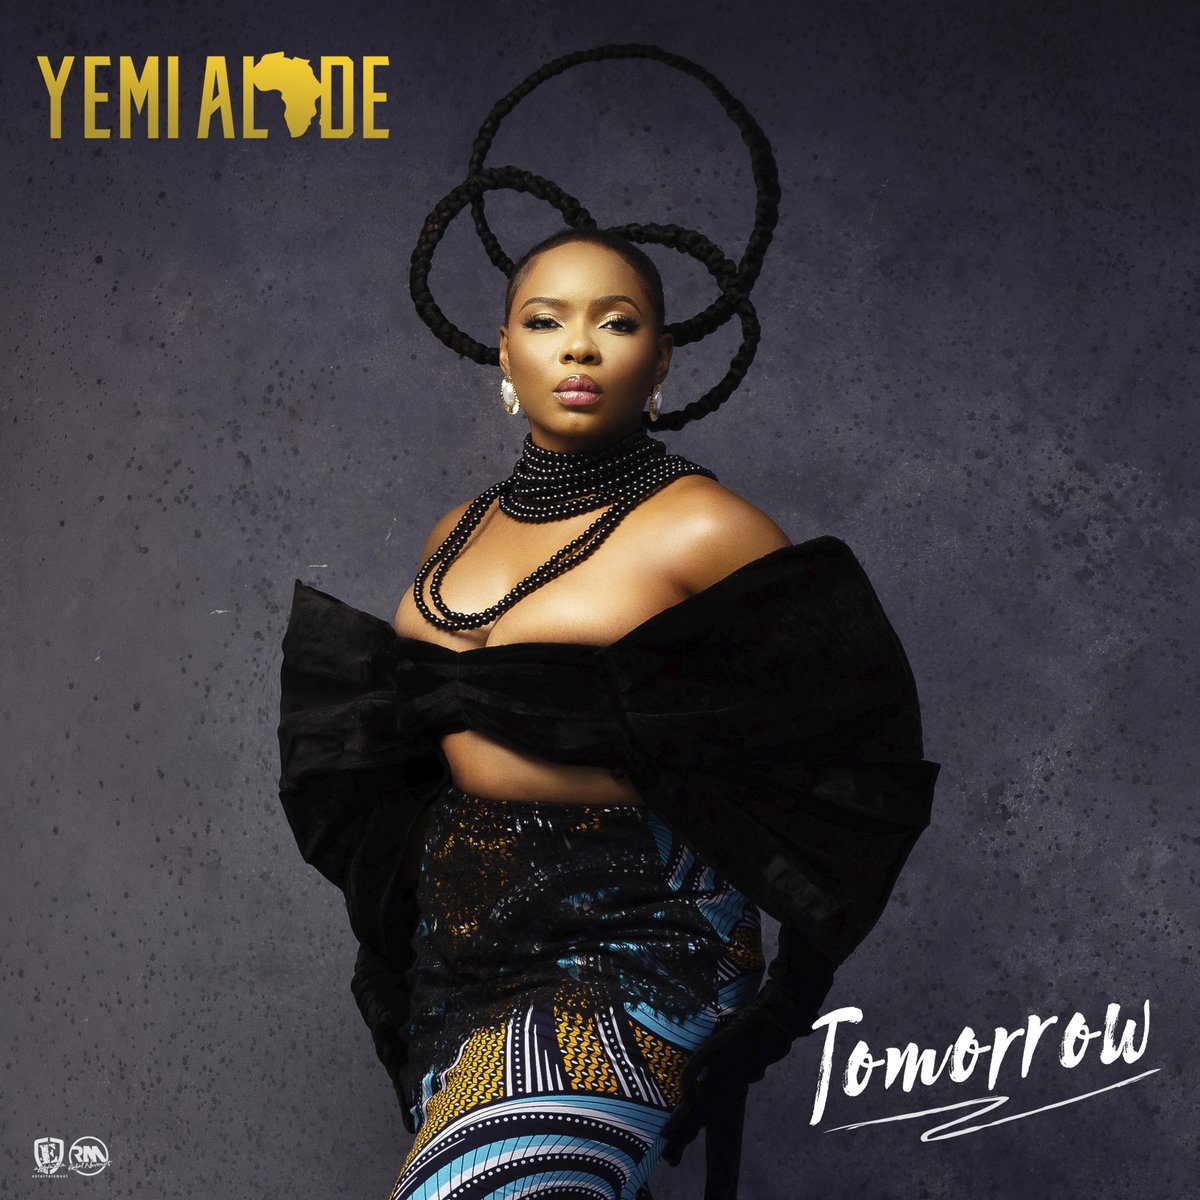 ICYMI: Renowned Afropop sensation @yemialadee 🇳🇬 has just dropped her latest single, titled “Tomorrow”. This track serves as a precursor to her highly anticipated 10th studio album, ‘Rebel Queen’, slated for release in 2024... 1/3